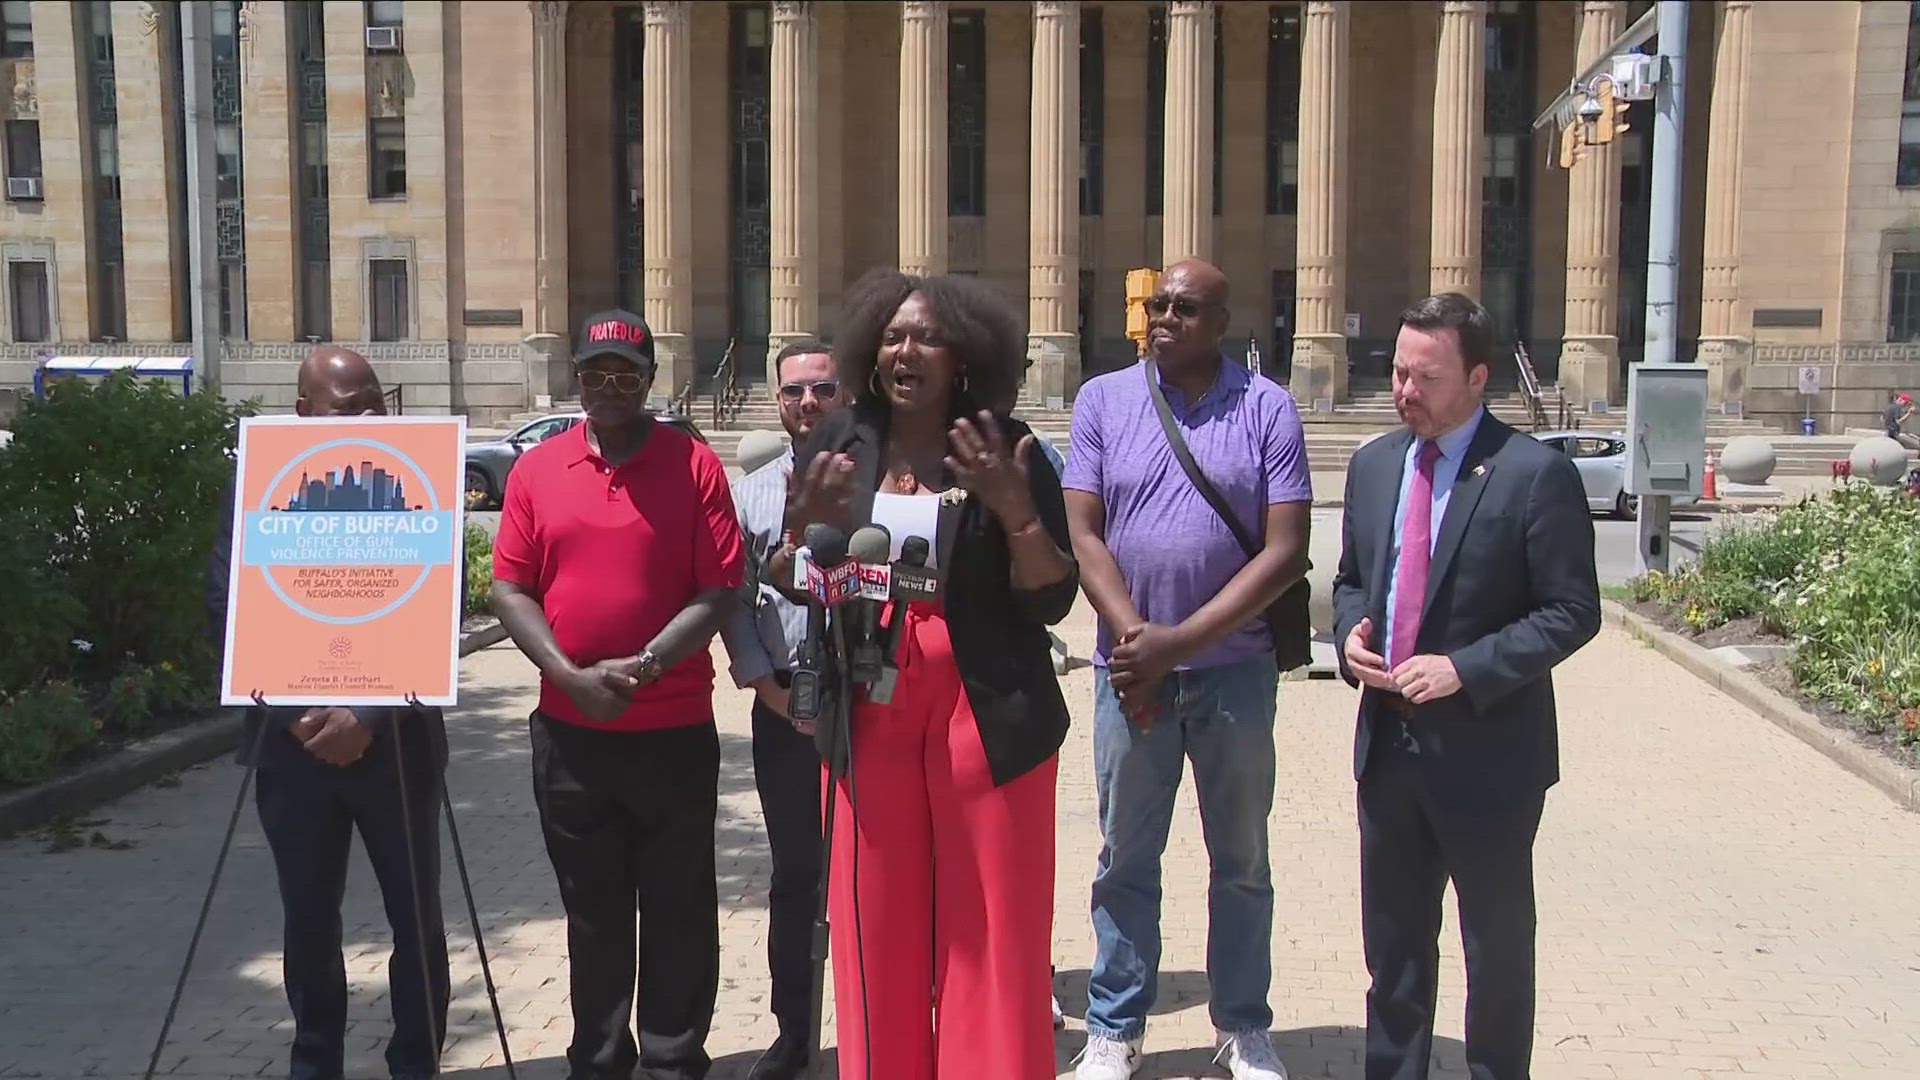 New initiative to combat gun violence in the city of Buffalo